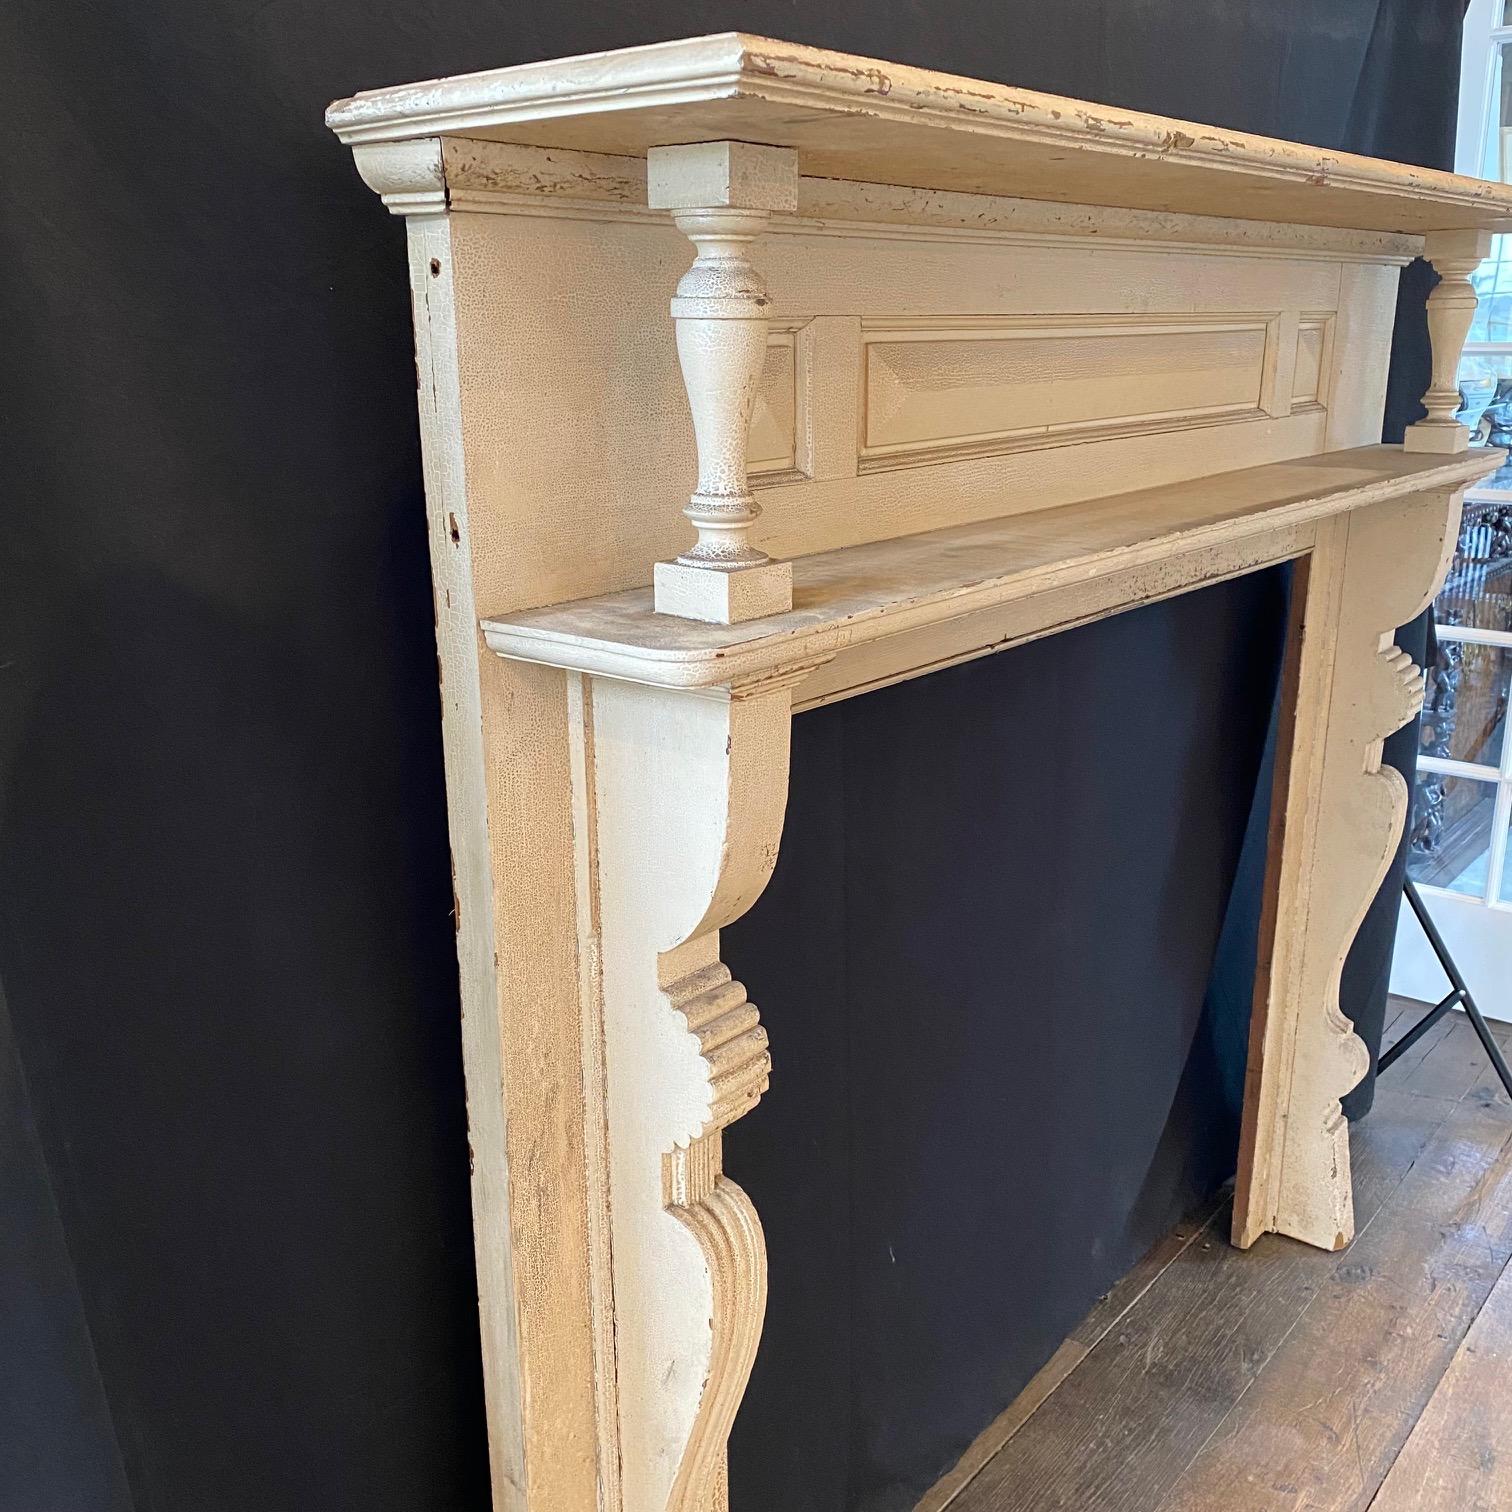 Crafted in the Federal style with a striking paneled frieze and light cream paint finish, this antique fireplace mantel brings elegance, and also adds some Arts and Crafts era touches in its carved details. The simple and unassuming design is truly